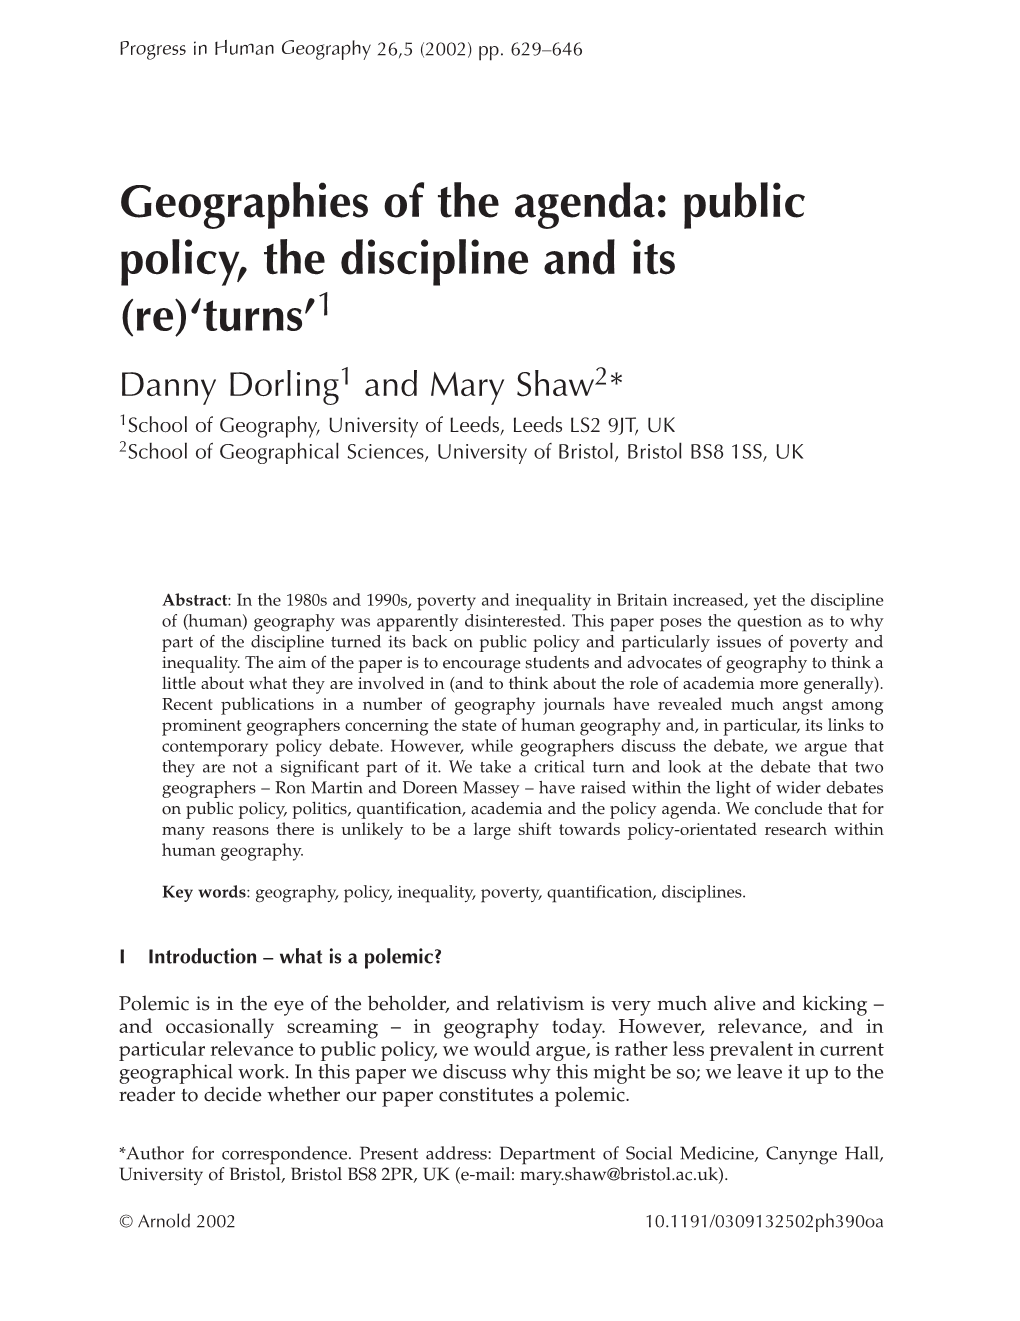 Geographies of the Agenda: Public Policy, The